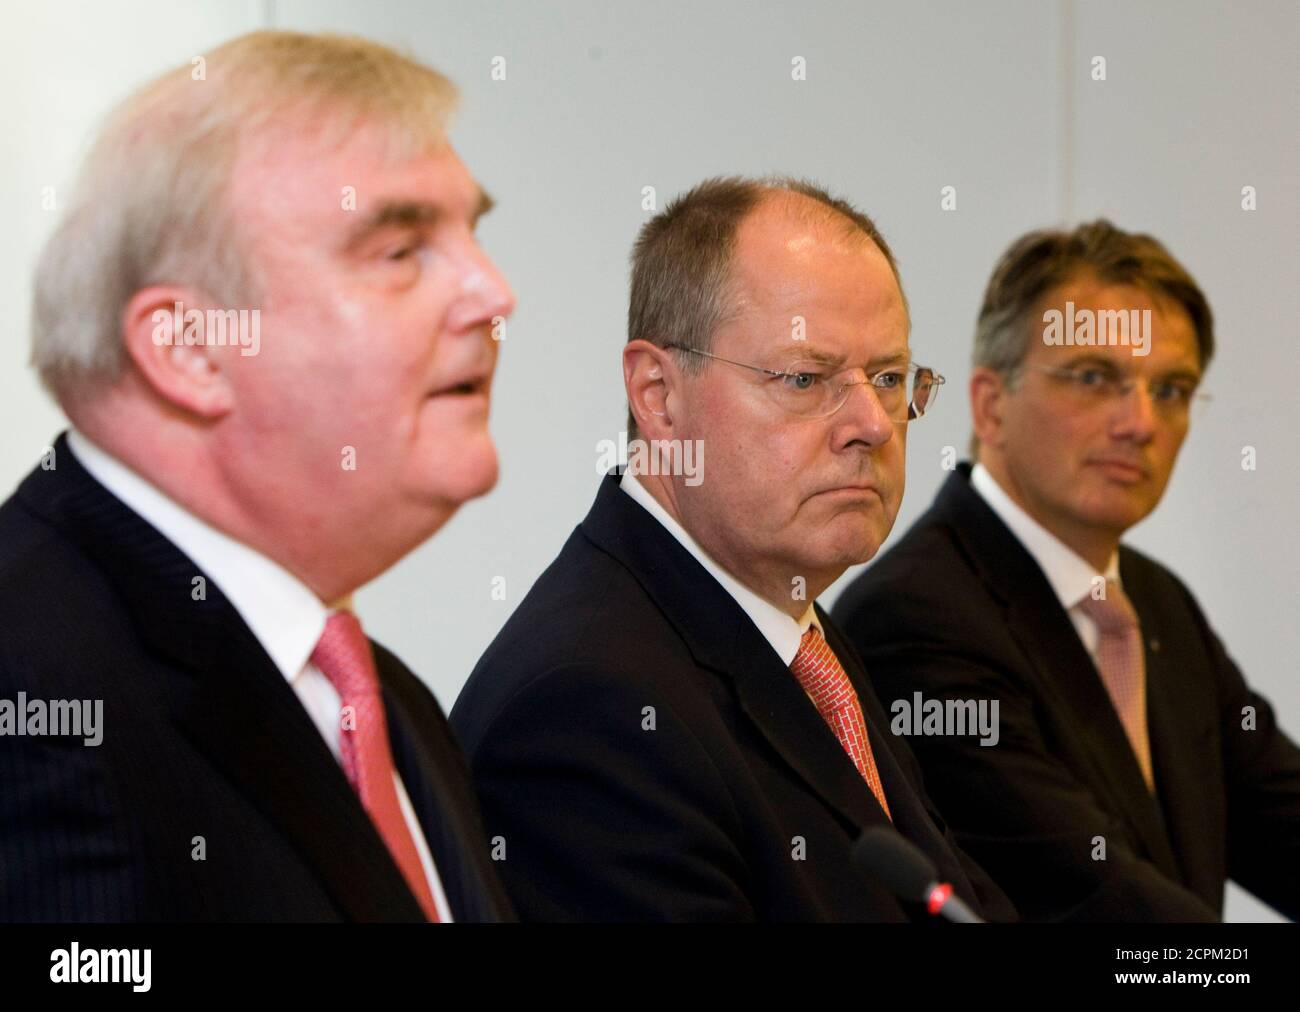 (L-R) German Finance Minister Peer Steinbrueck, the Association of German Chambers of Industry and Commerce (DIHK) President Hans Heinrich Driftmann and the President of the cooperative banks alliance of Volksbanken and Raiffeisenbanken (BVR) Uwe Froehlich attend a news conference on the situation of credit financing in the German economy in Berlin September 1, 2009.  REUTERS/Thomas Peter  (GERMANY POLITICS BUSINESS) Stock Photo